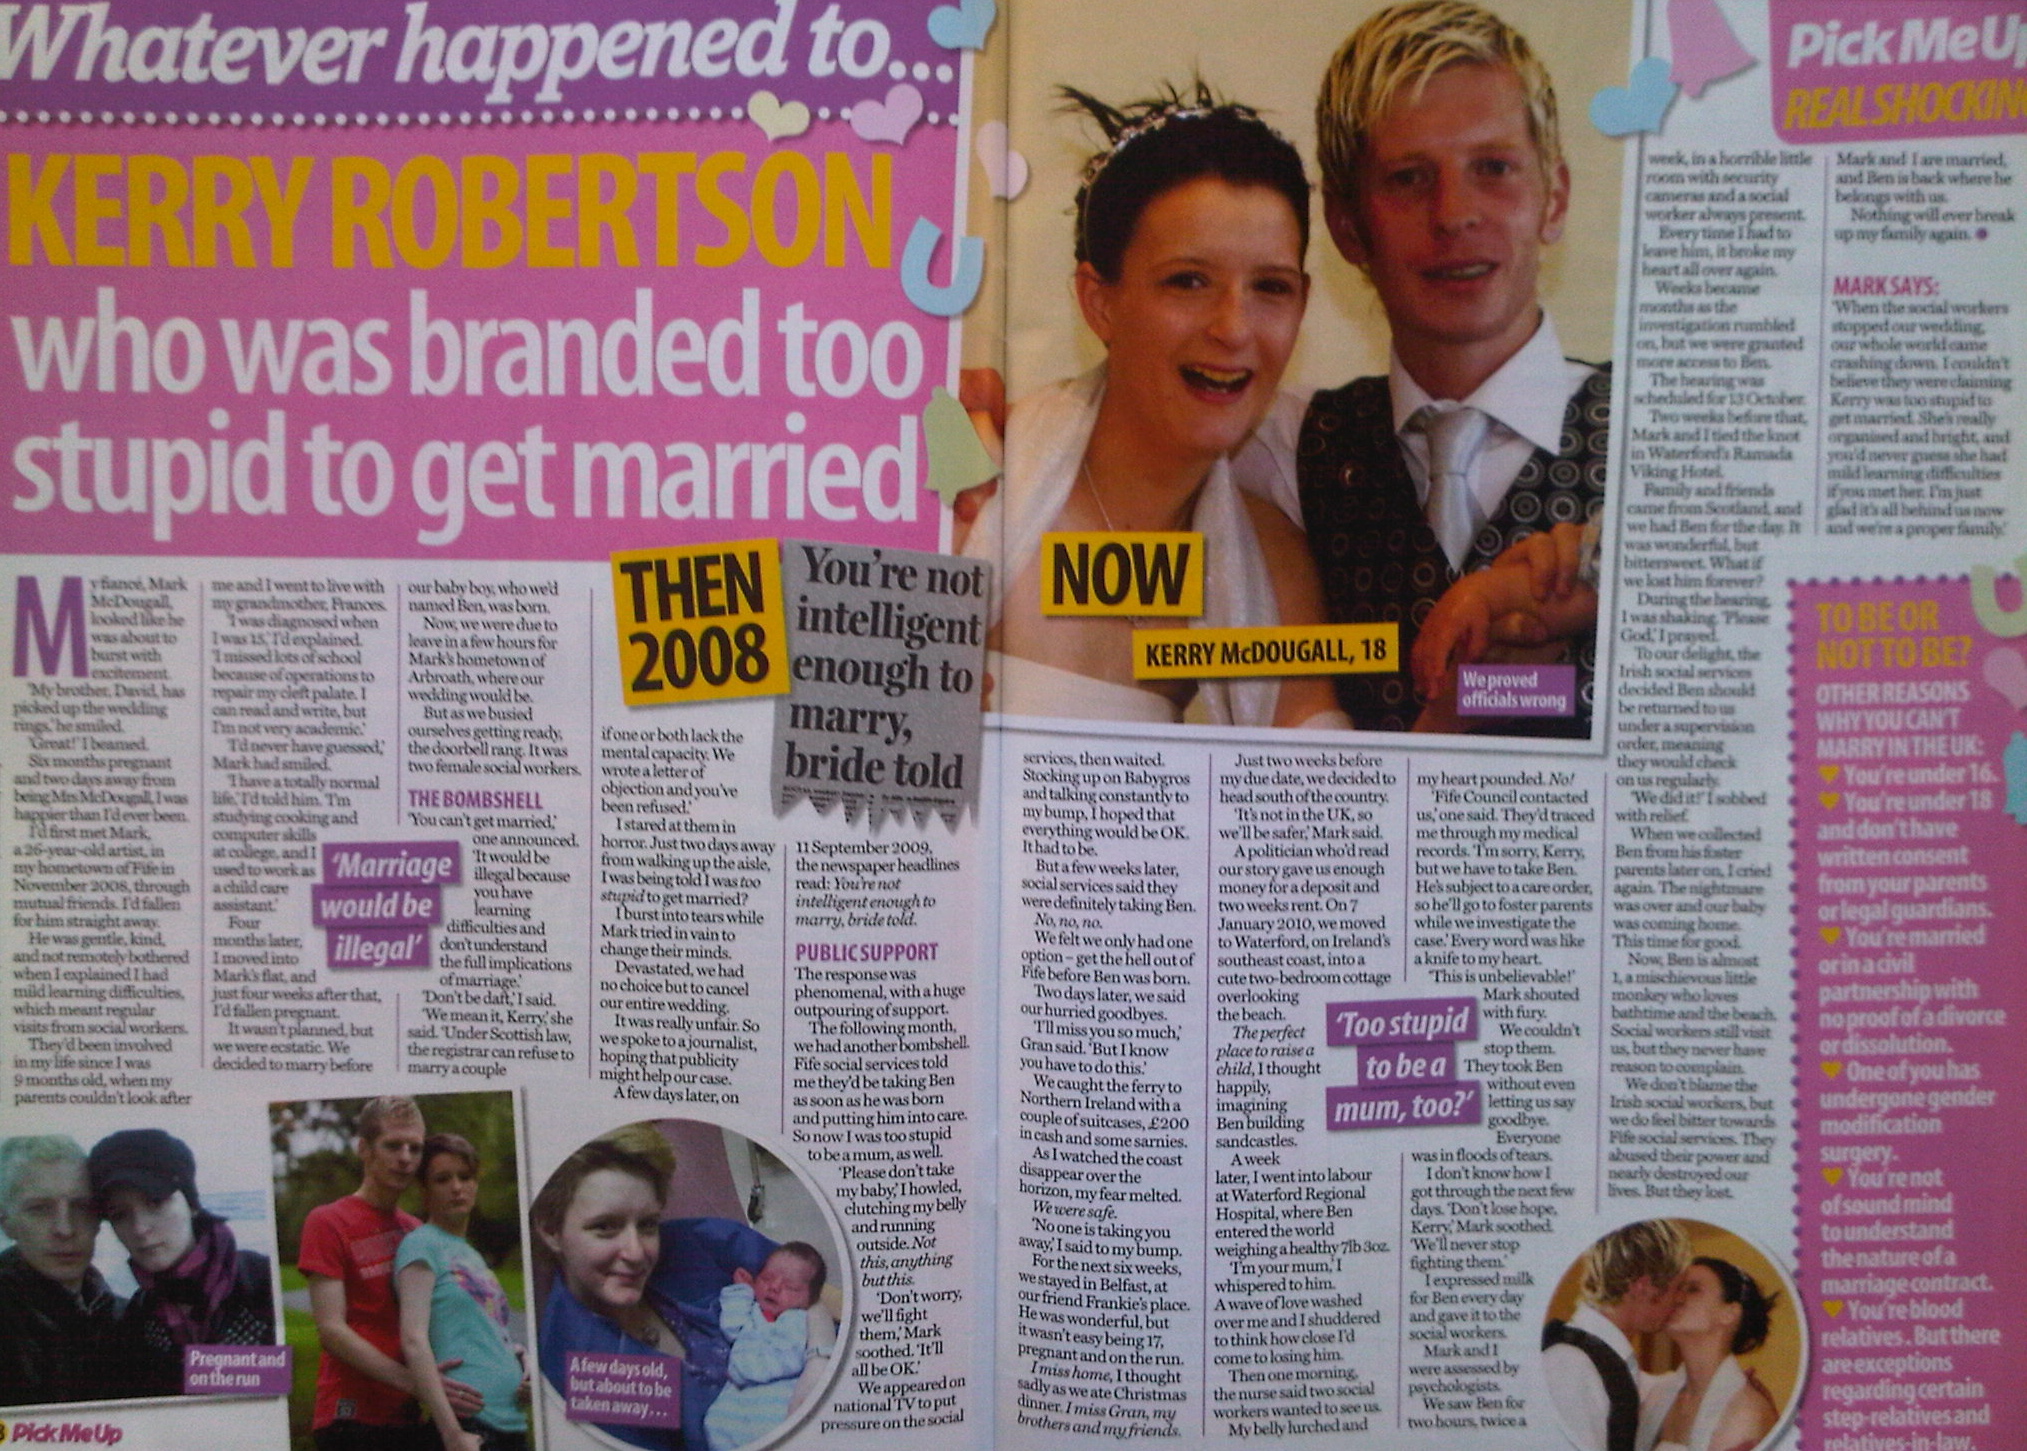 Mum 'too stupid to marry' makes front page of Pick me Up magazine...